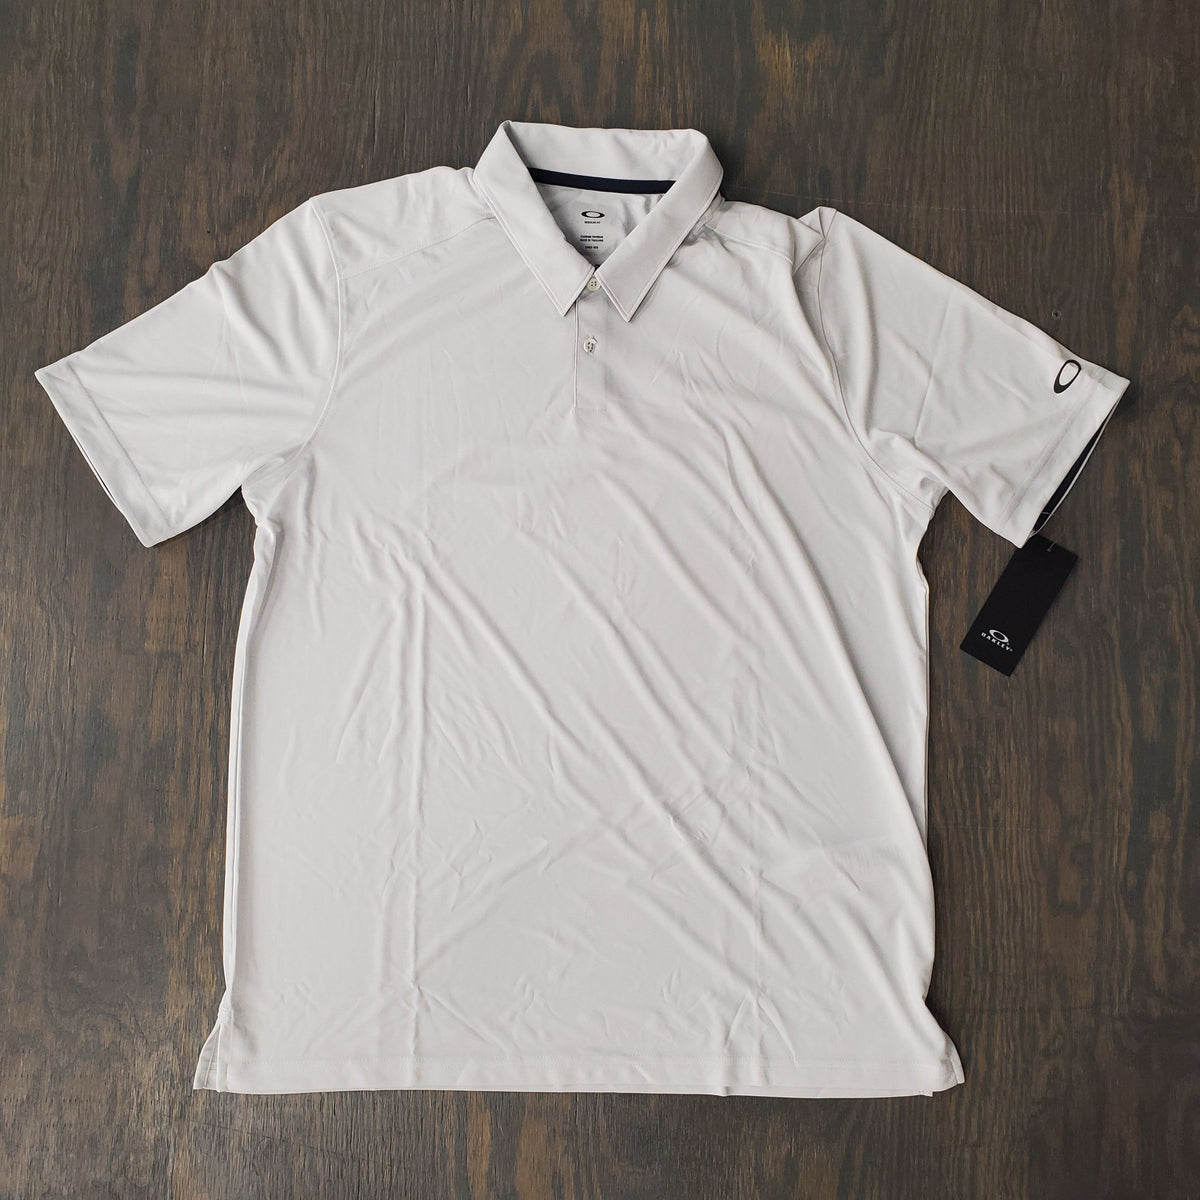 Oakley Divisonal Polo - White - Large - Used - Acceptable